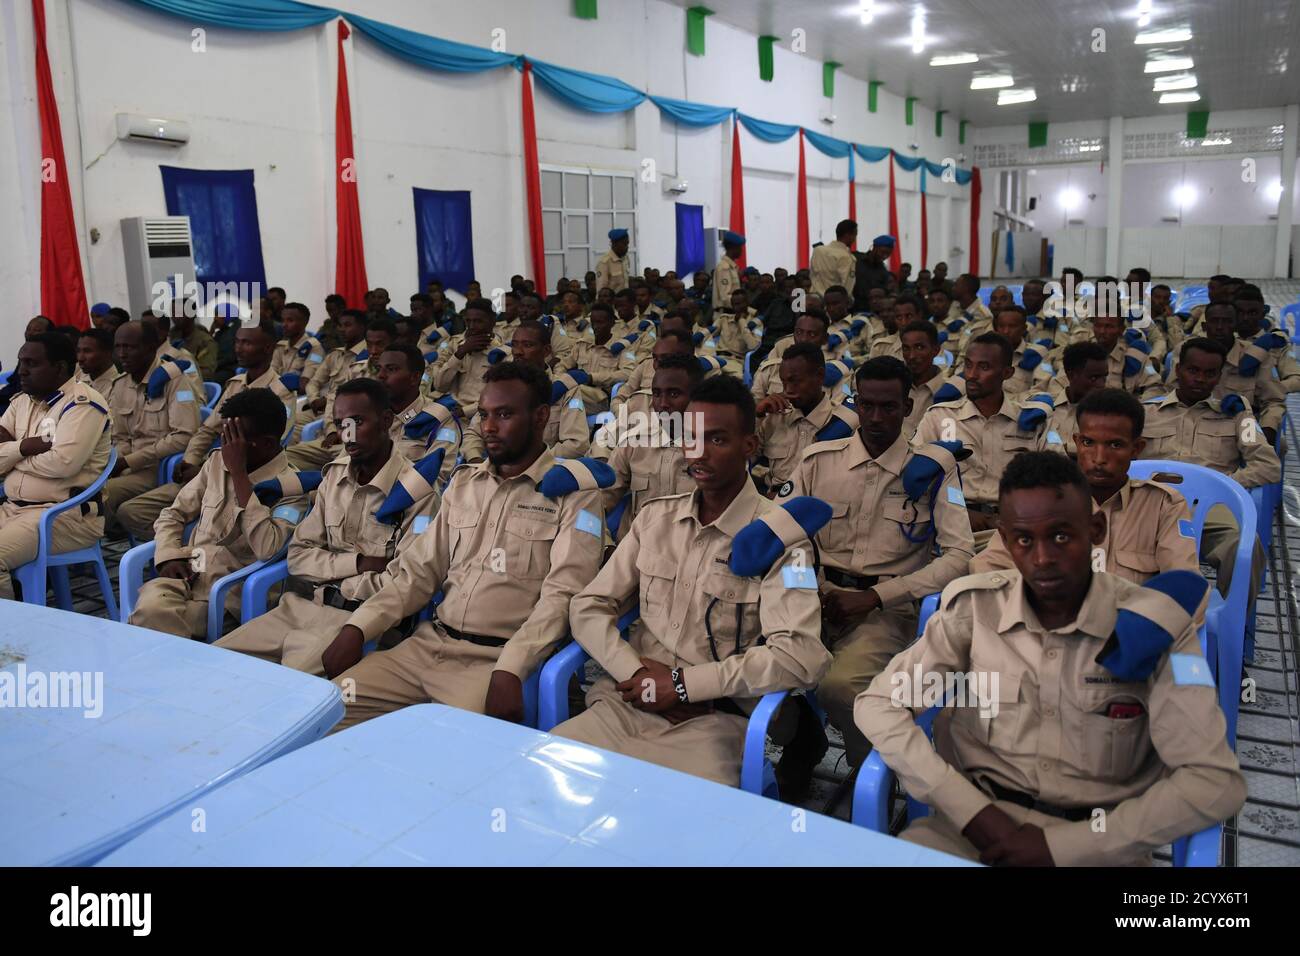 Newly Recruited Somali Police Force Spf Personnel Attend The Launch Of A Community Policing Program In Mogadishu Somalia On 9 August 18 Stock Photo Alamy